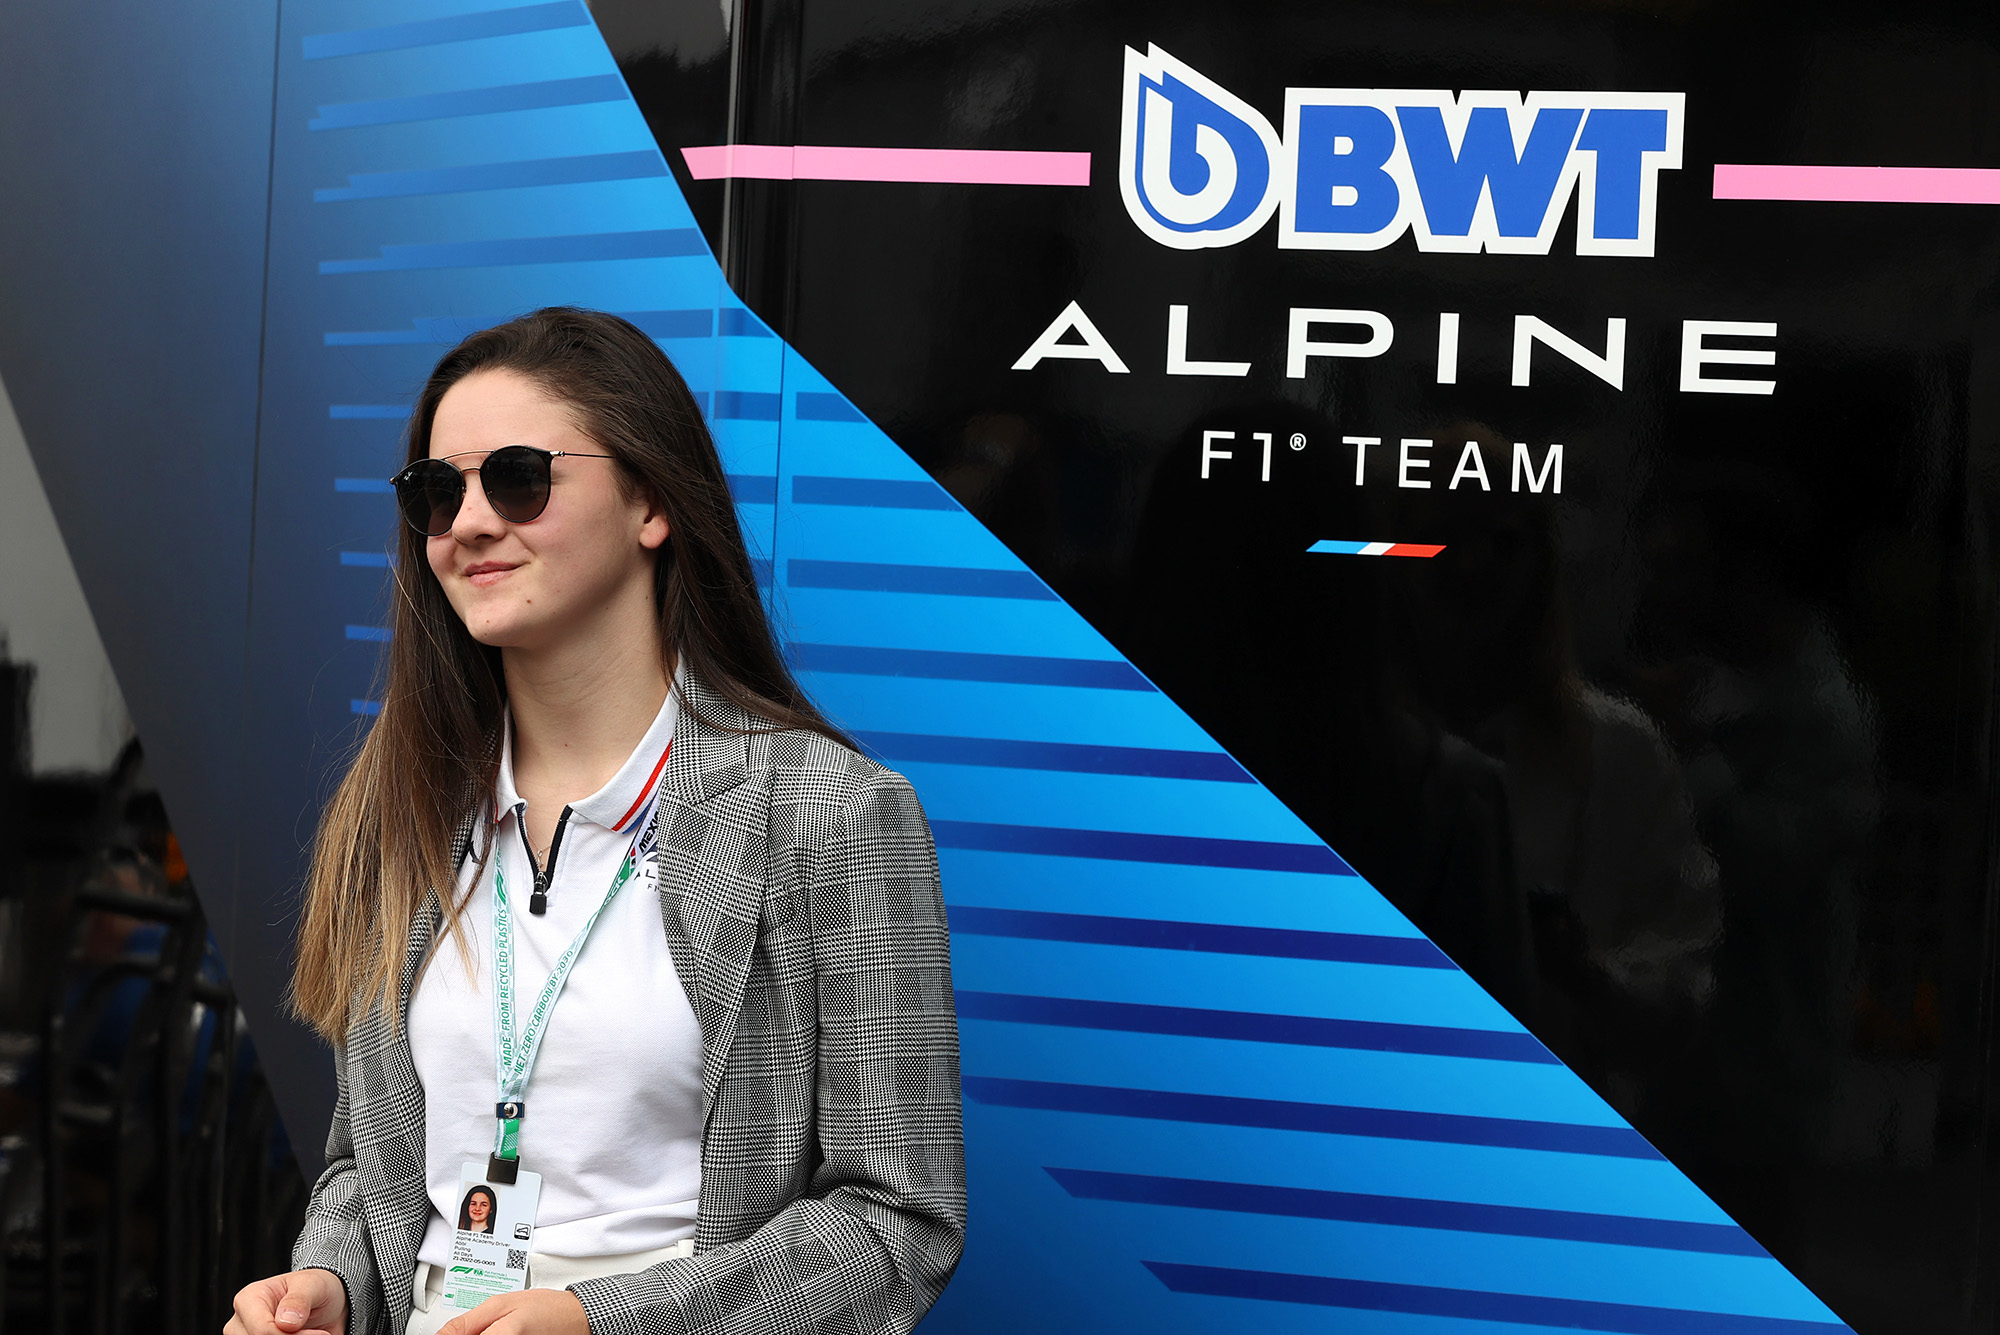 f1’s new all-female series won’t be broadcast live